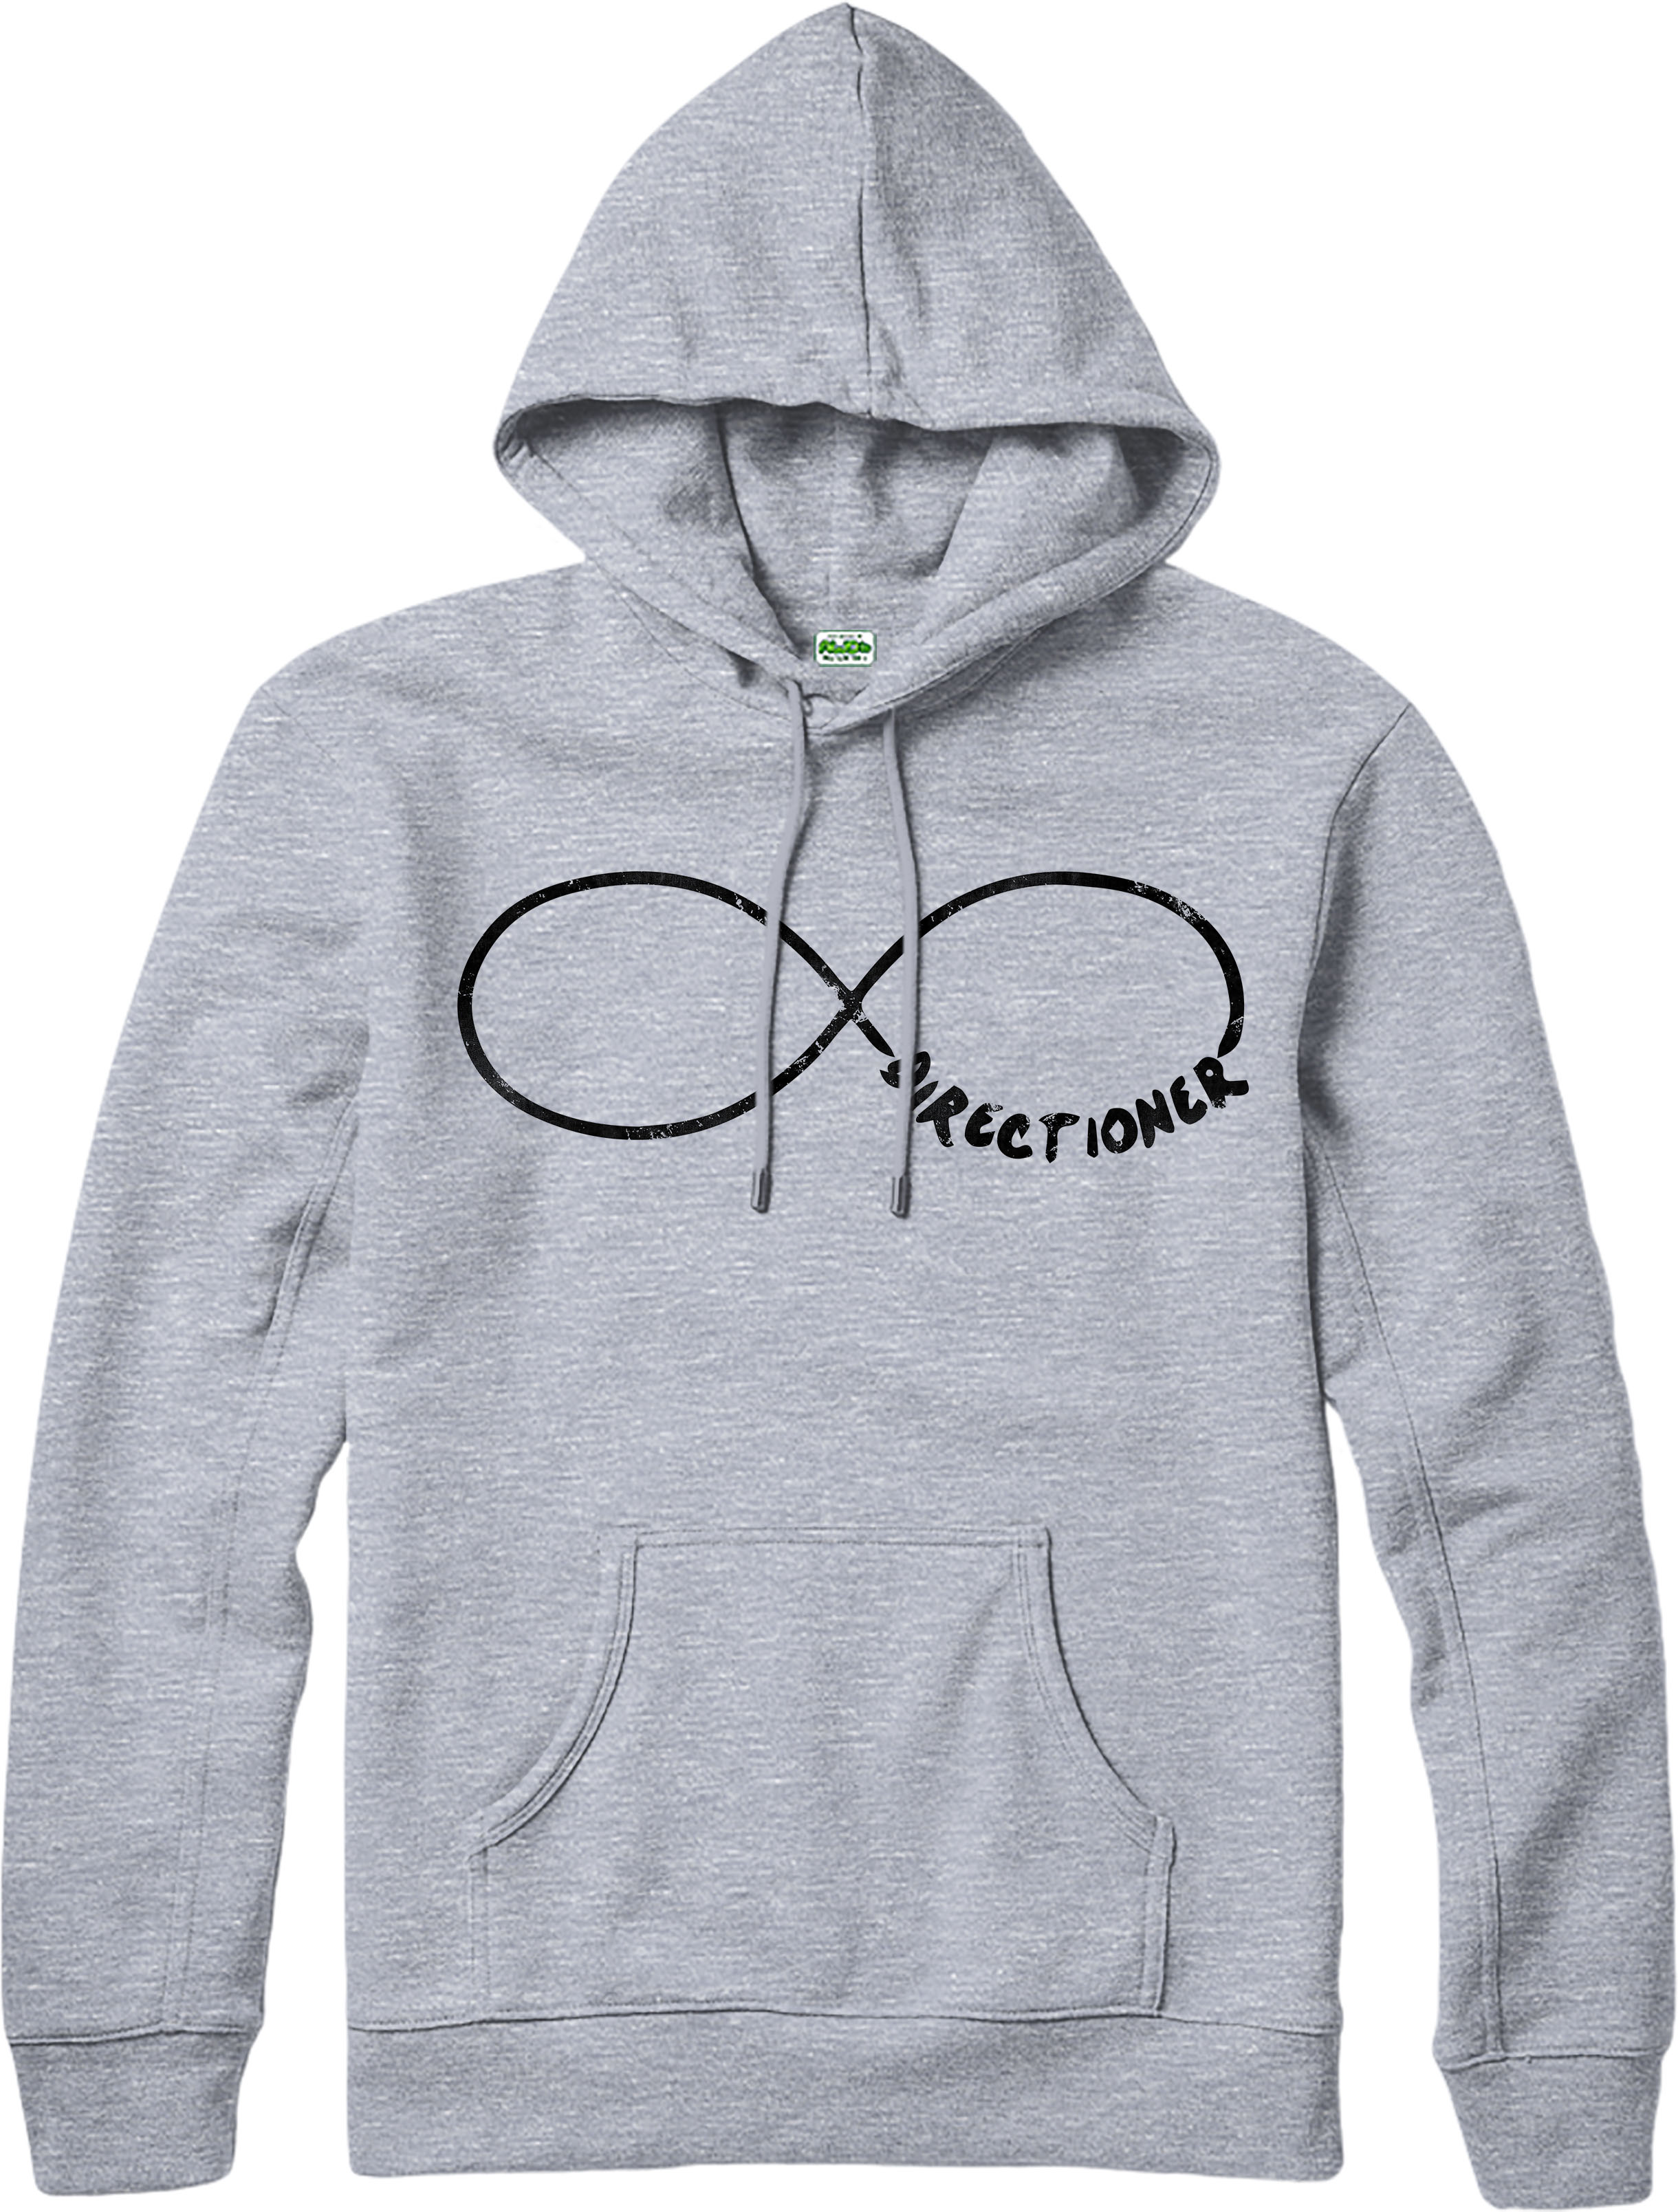 One Direction Hoodie,One Direction Infinity Spoof,Adult and kids Sizes